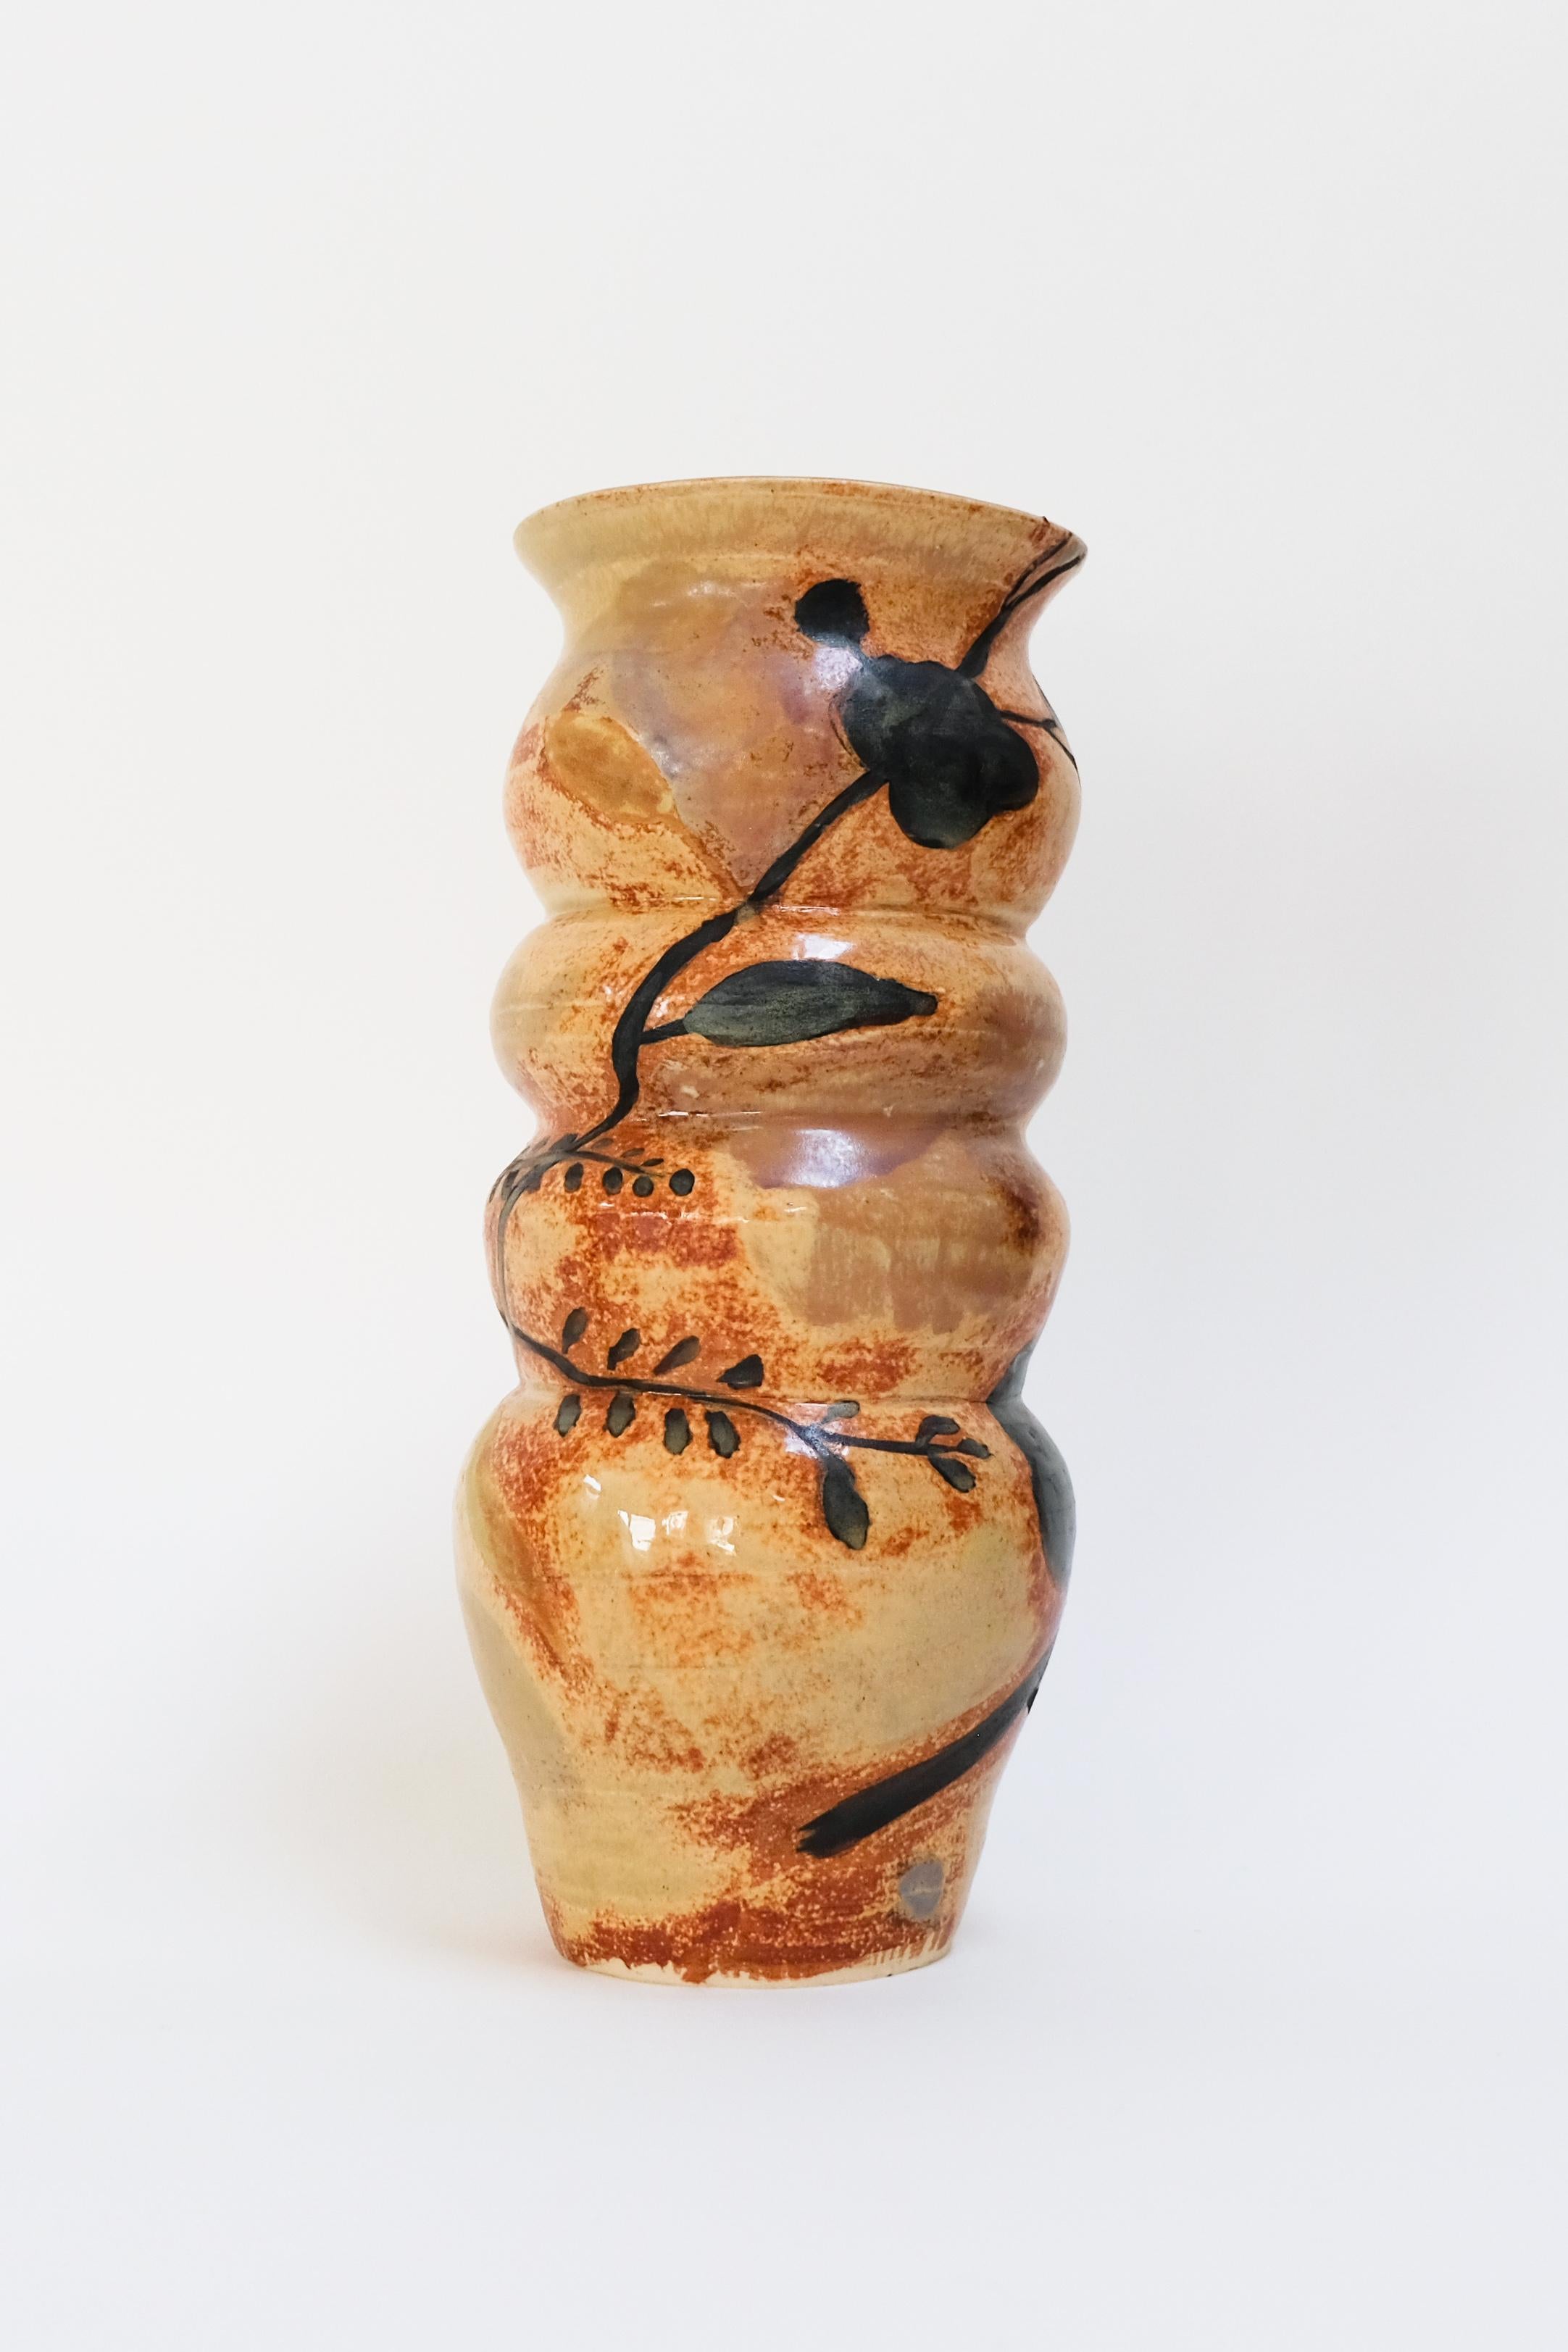 Searching for Berries - contemporary warm botanical ceramic vase, functional - Sculpture by Misbah Ahmed